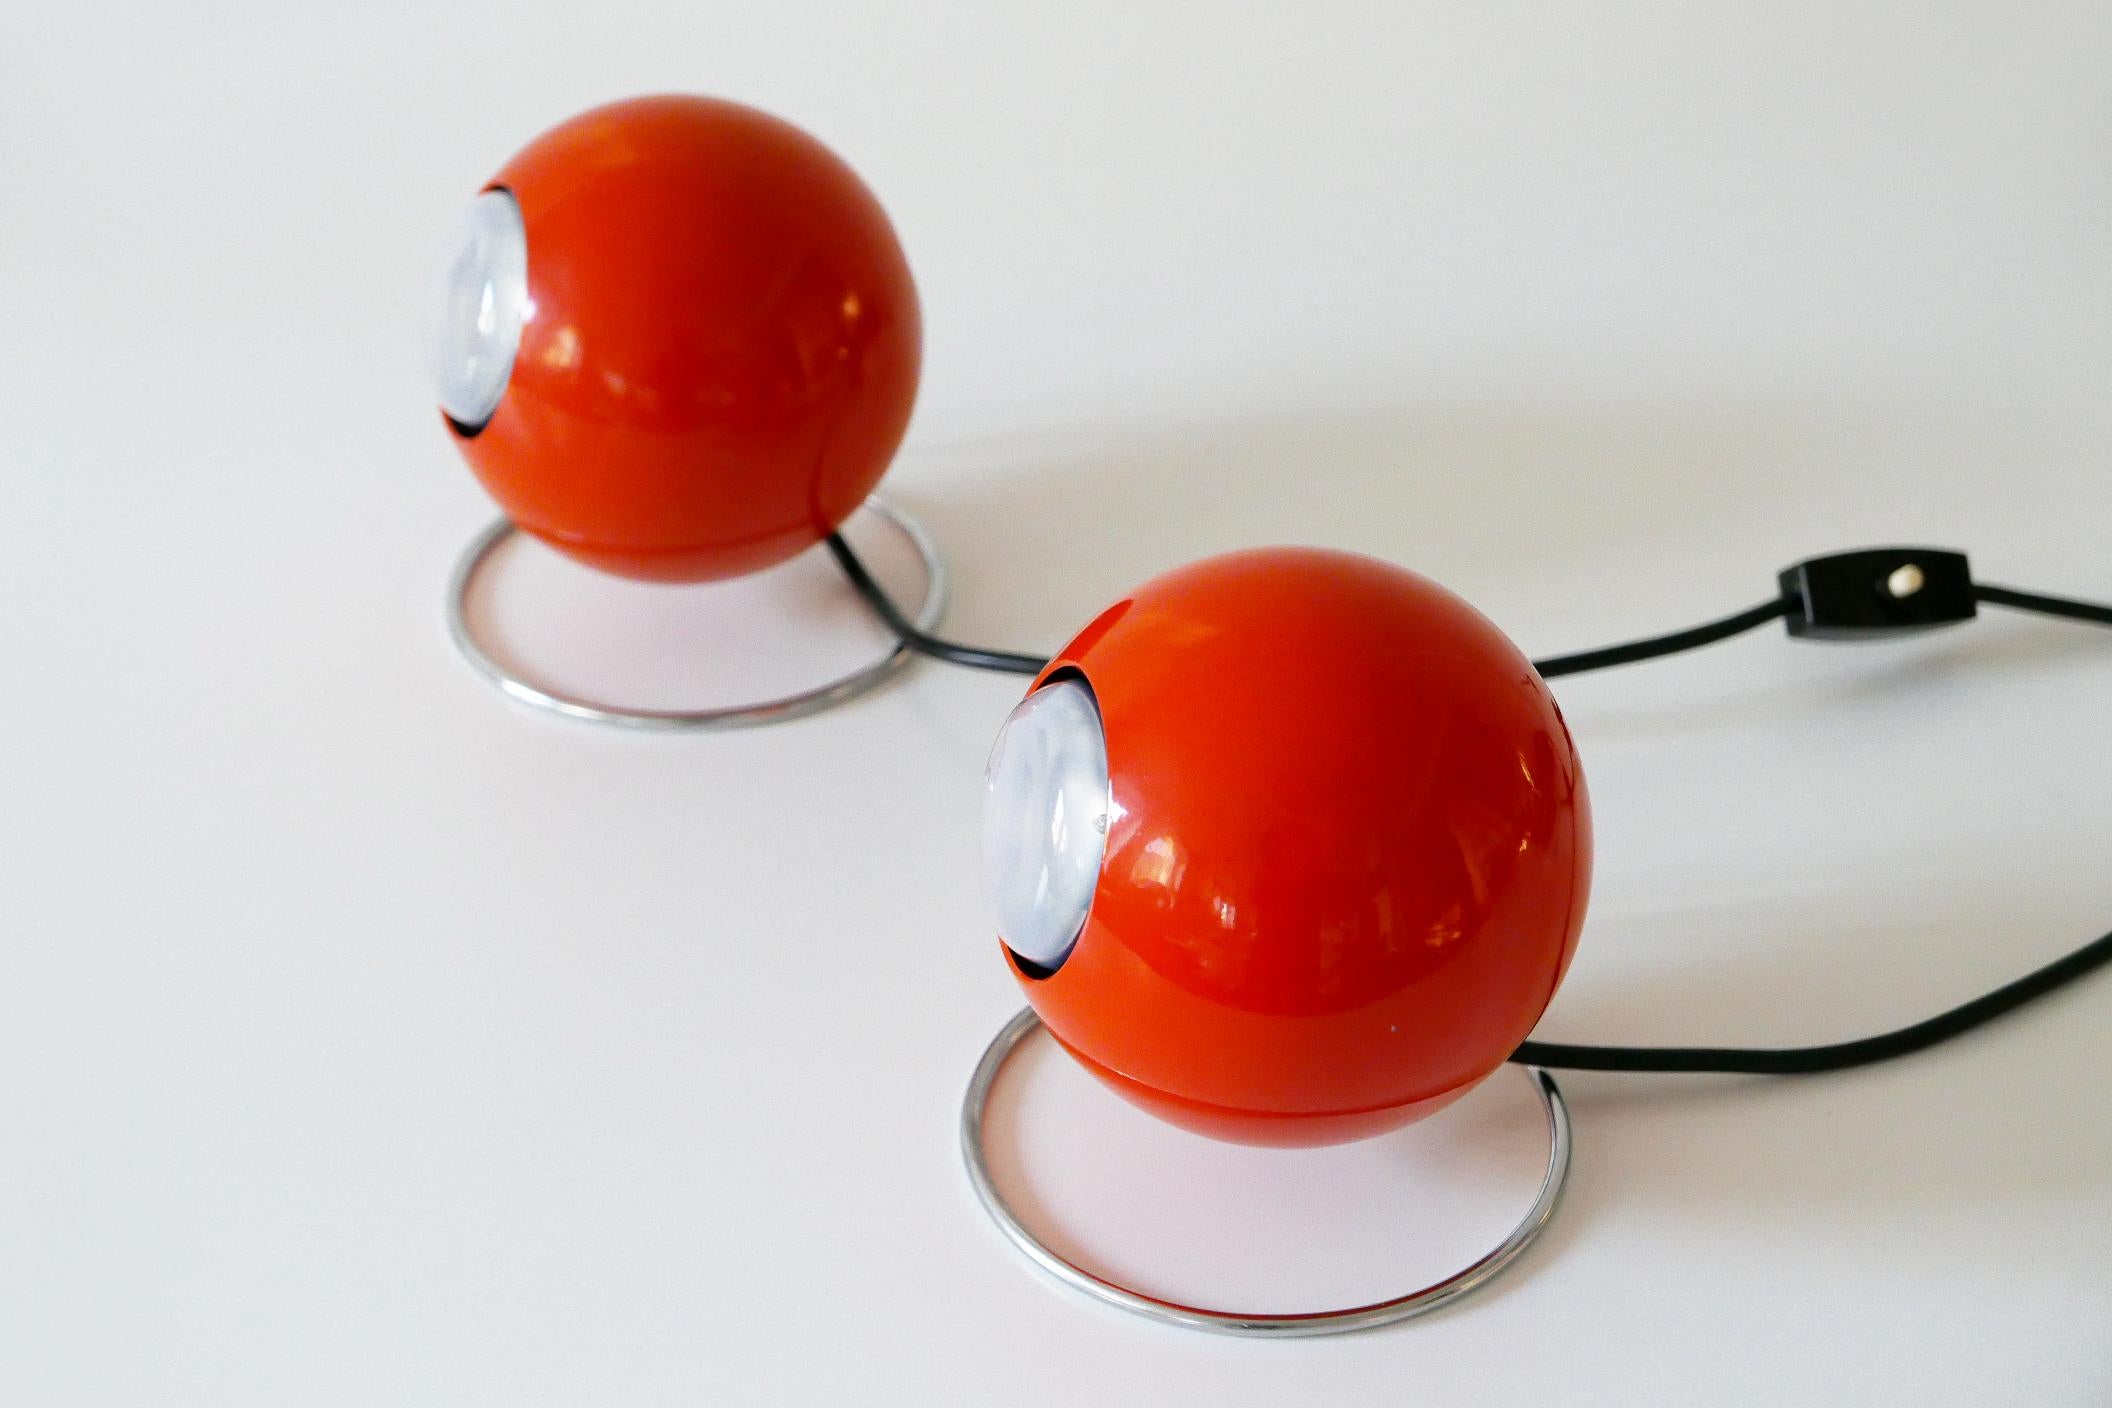 Set of Two Mid-Century Modern Metal 'Eye' Table Lamps, ERCO, 1960s-1970s Germany For Sale 10